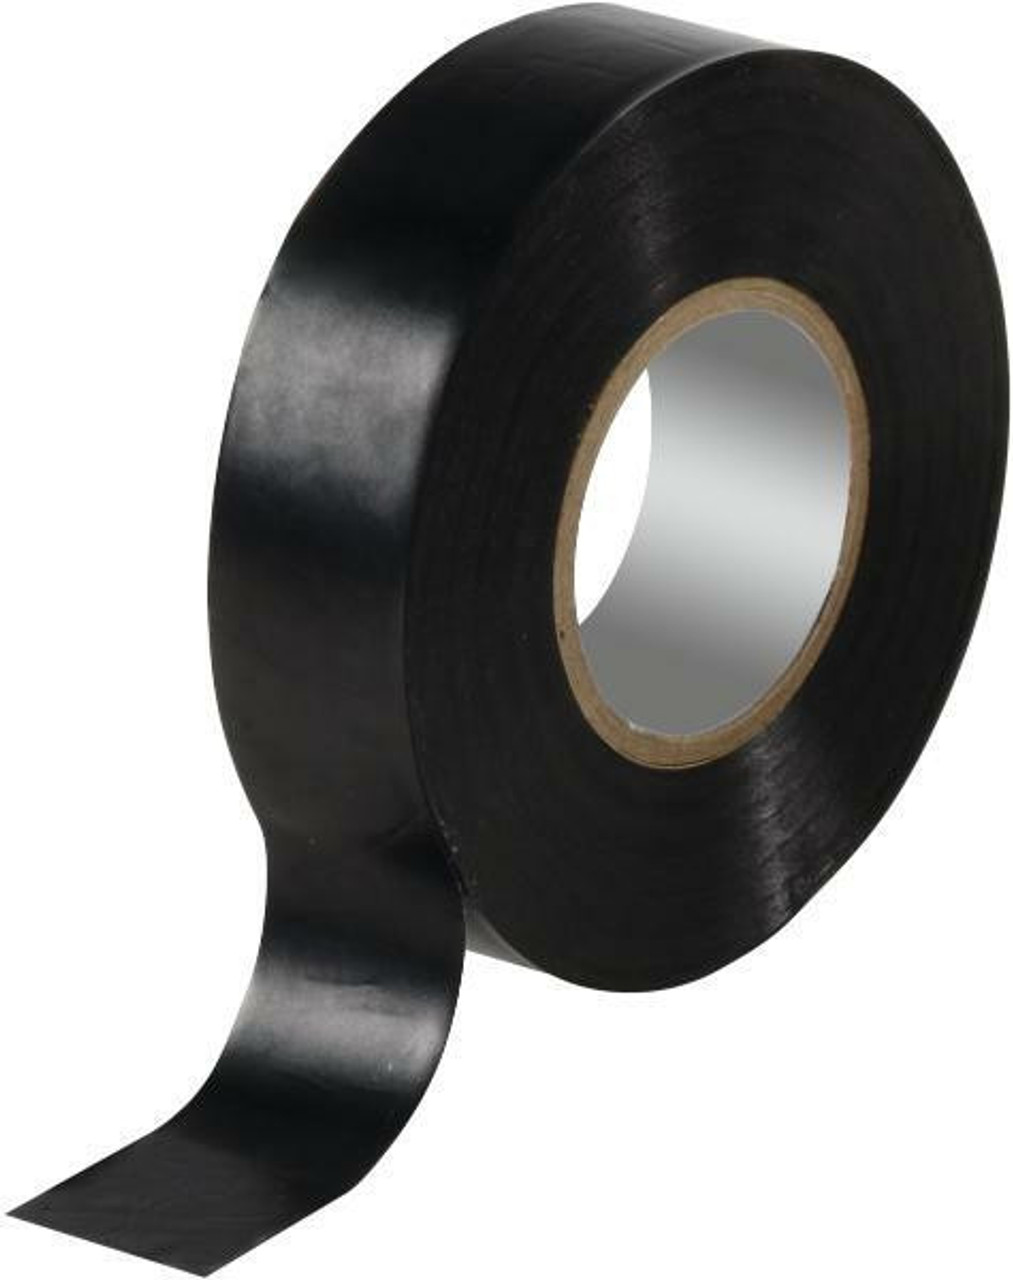 4 x Black PVC Tape Electrical PVC Insulating Insulation 15mm Wide Cable 15 Metre 